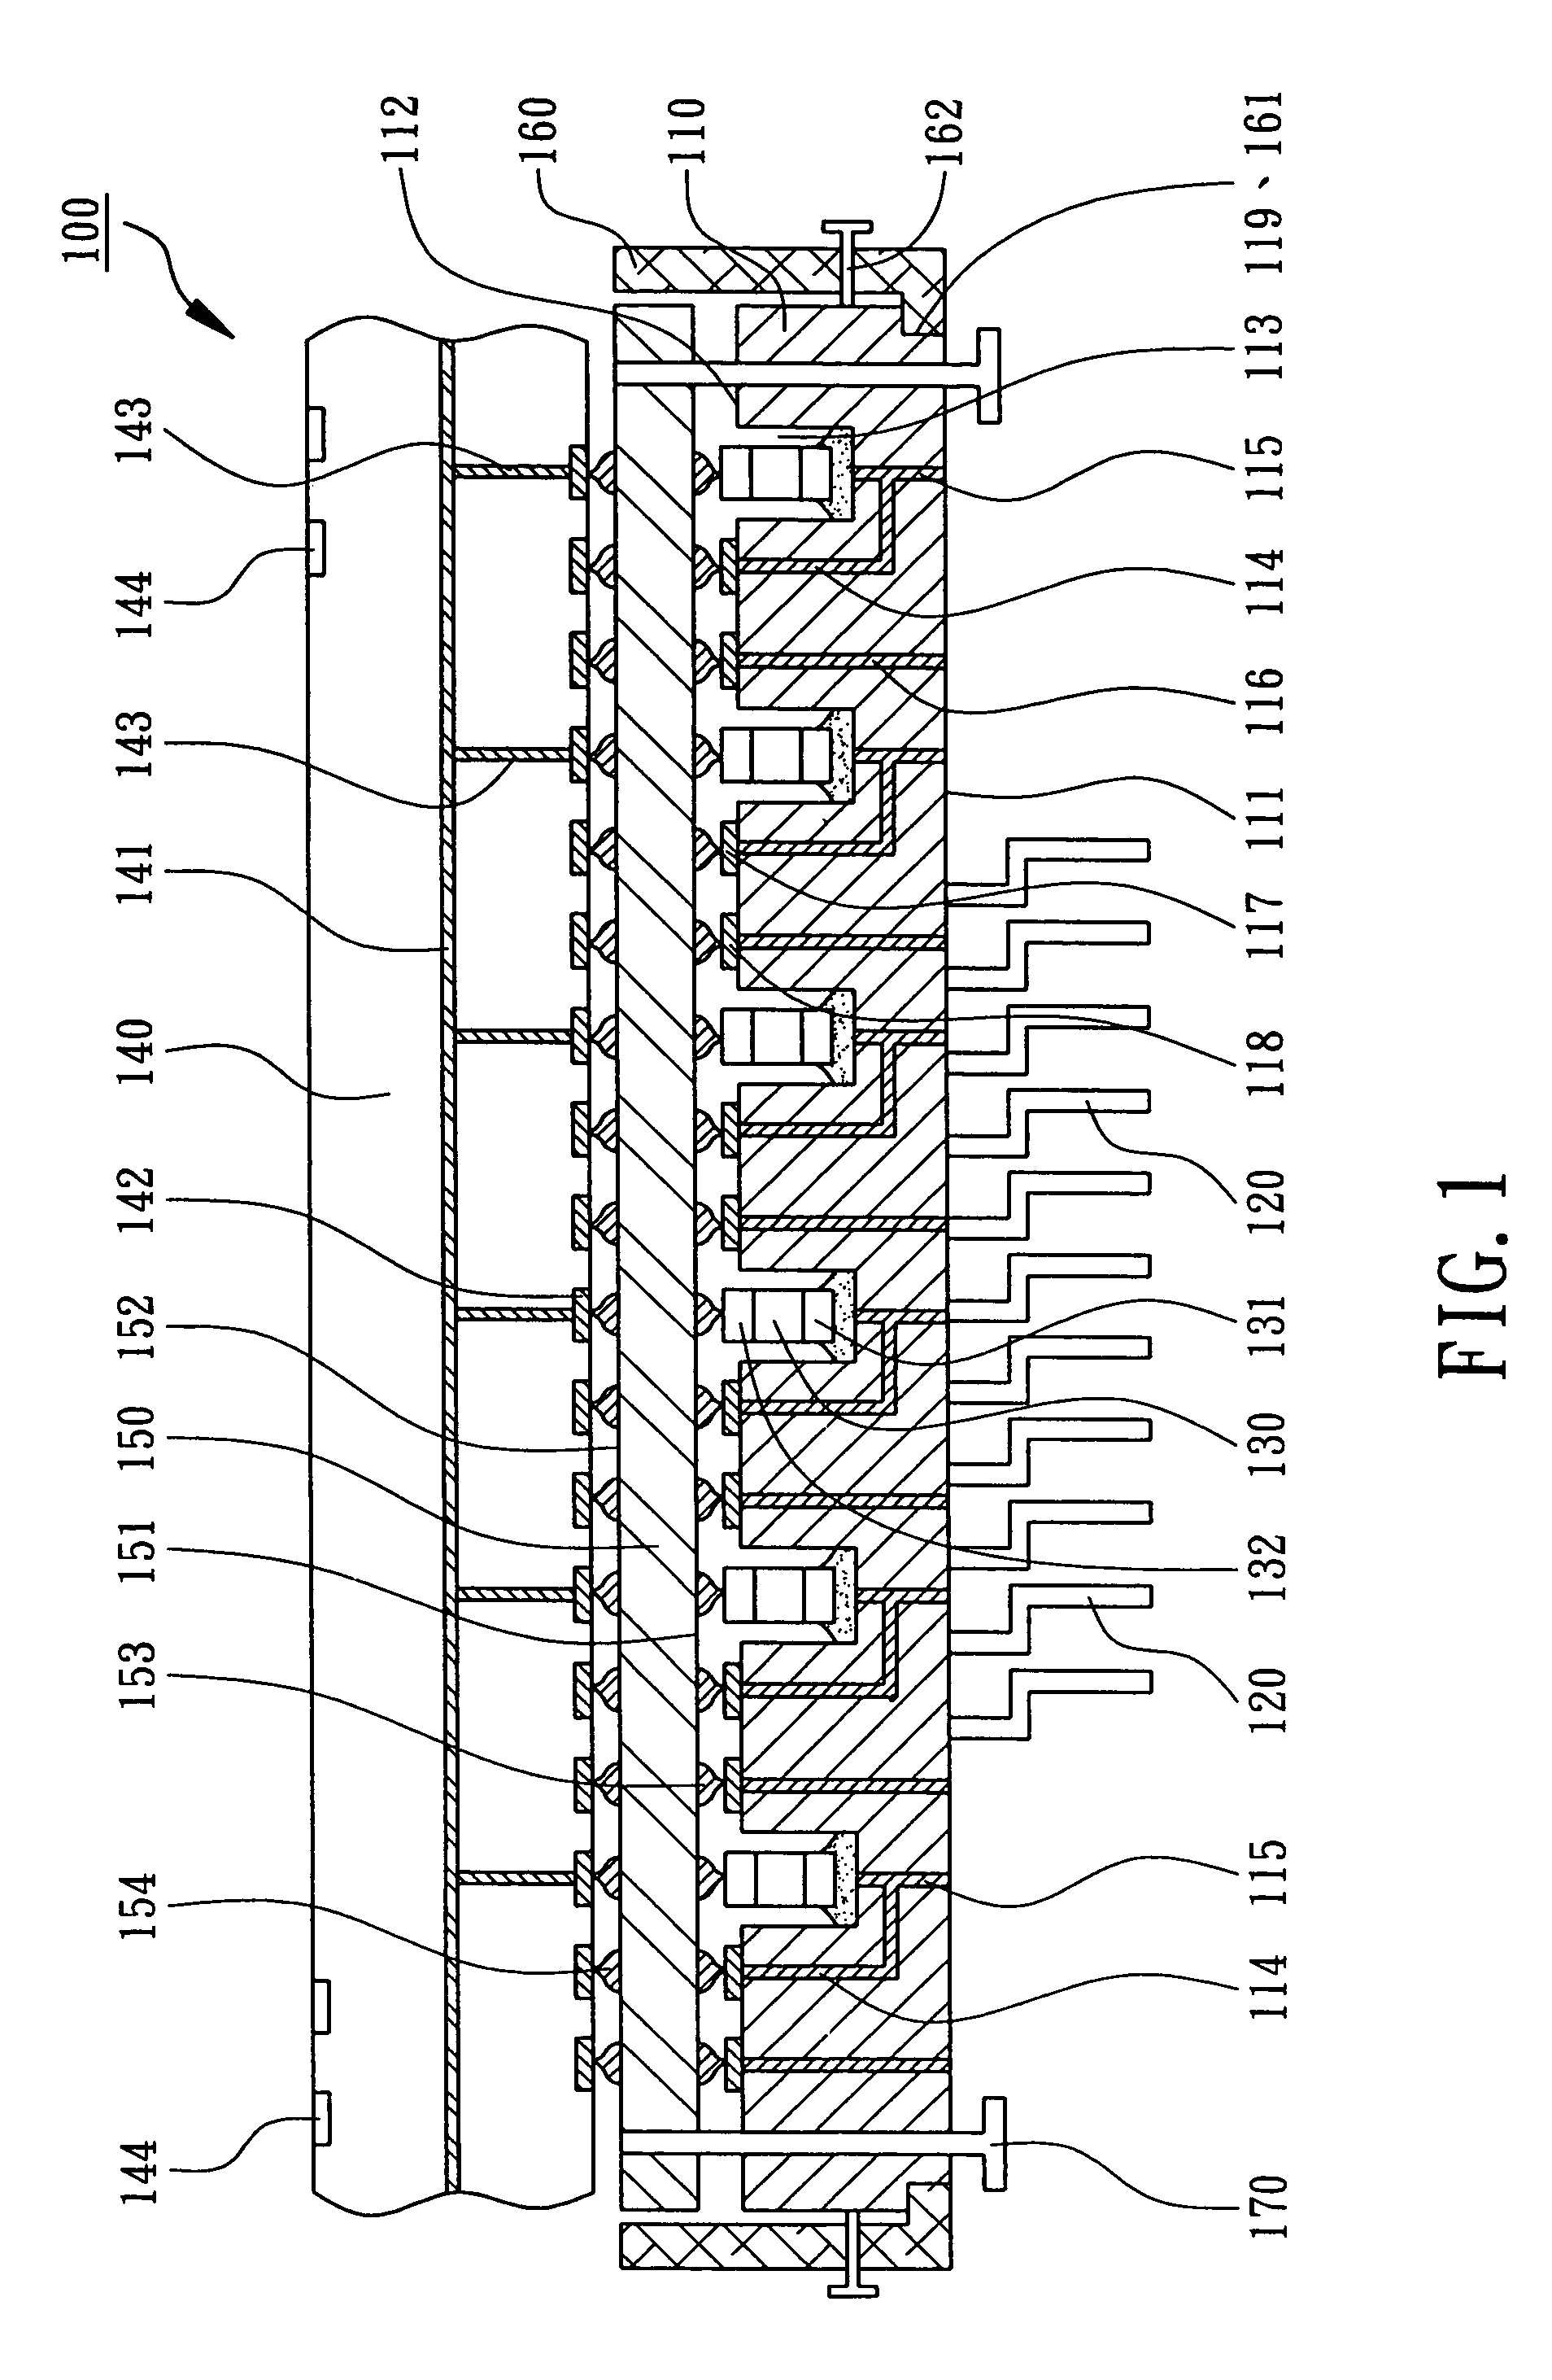 Modularized probe card for high frequency probing